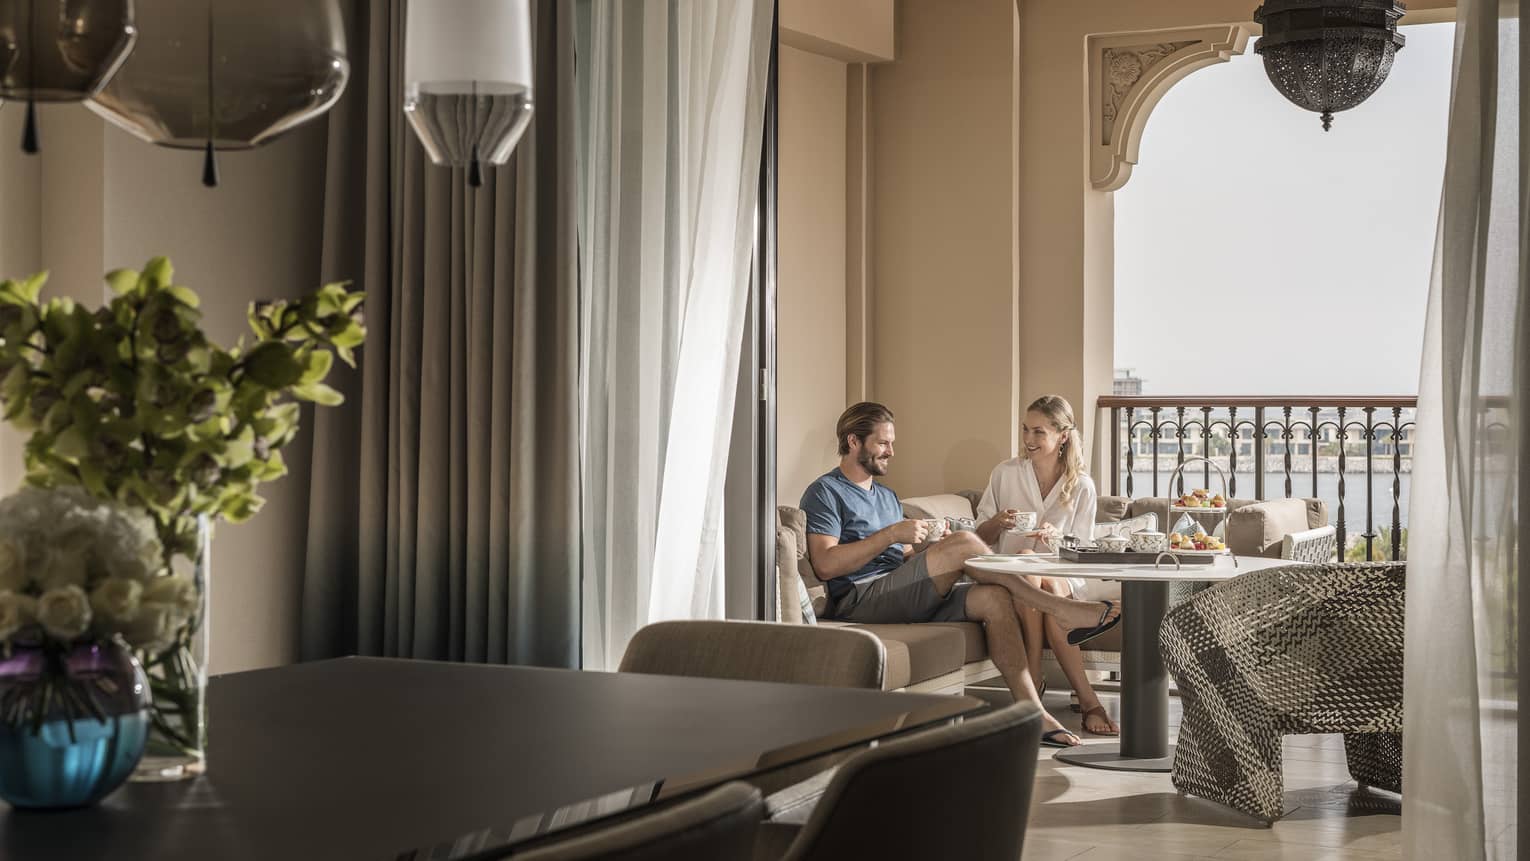 Hotel suite dining table in front of couple enjoying breakfast on covered balcony